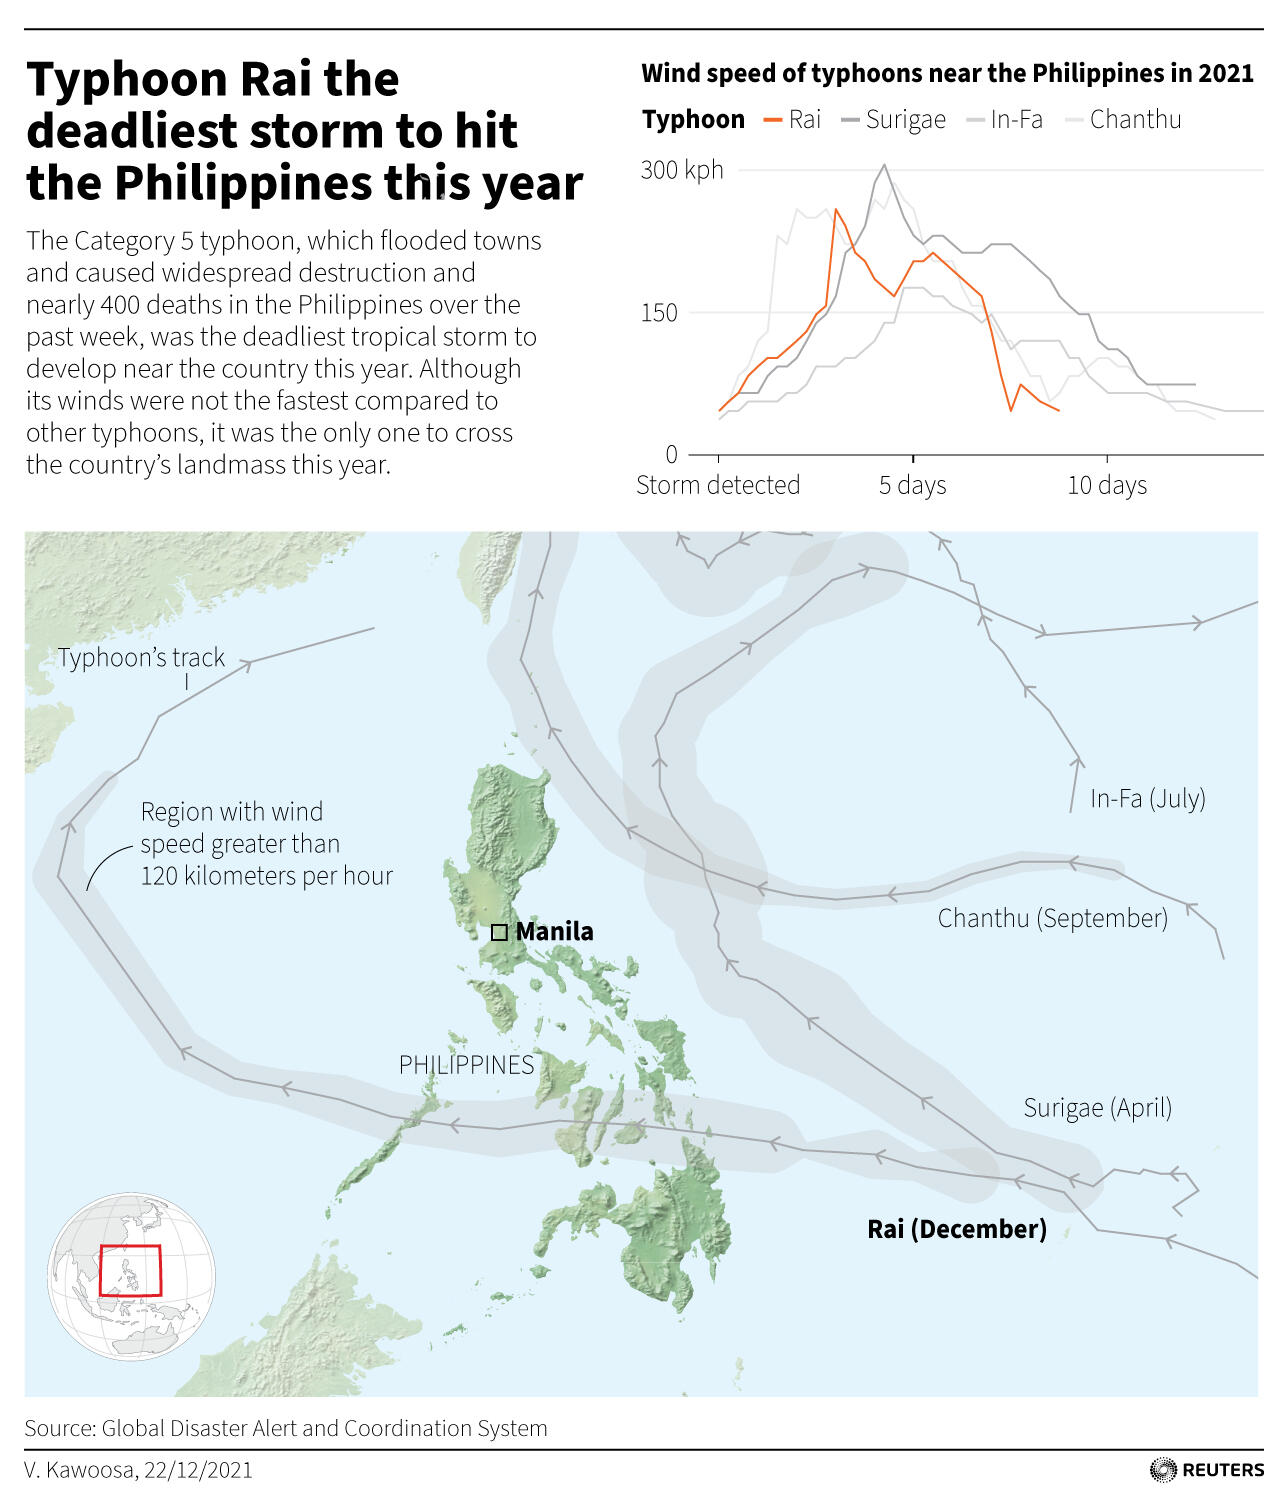 Typhoon Rai the deadliest storm to hit the Philippines this year